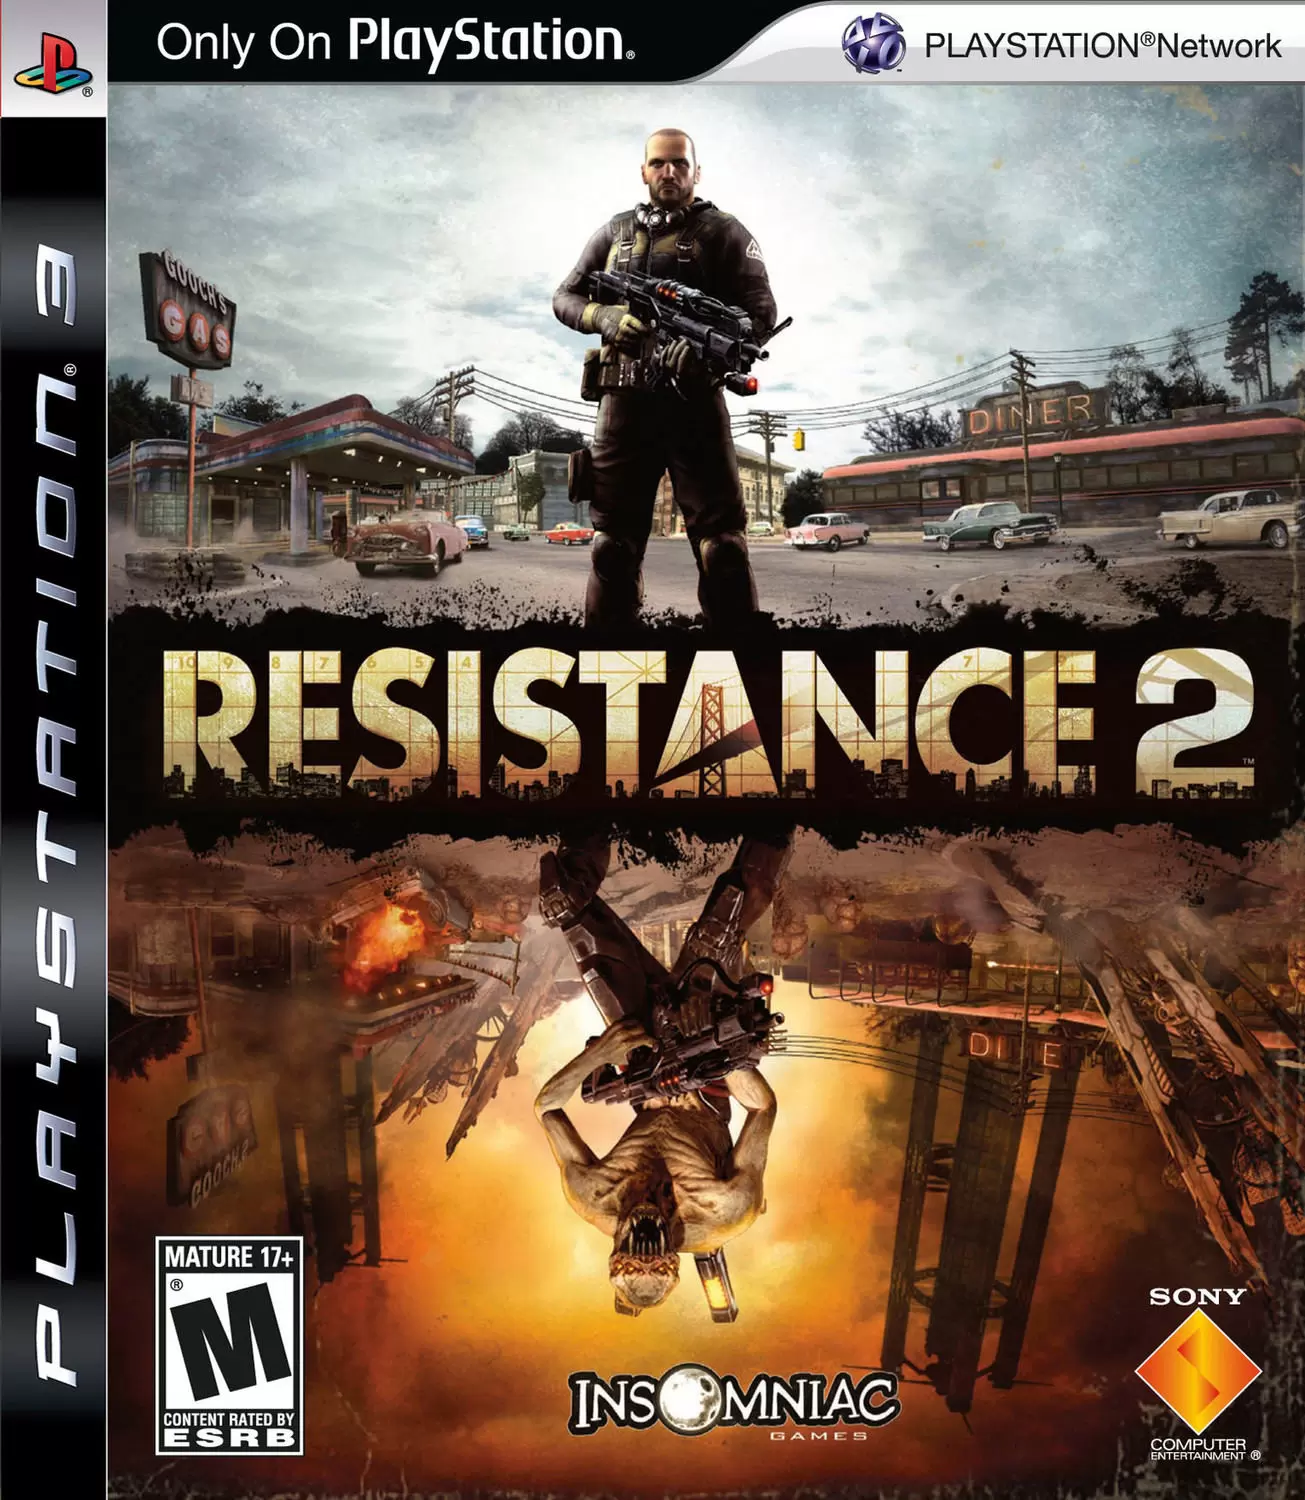 PS3 Games - Resistance 2